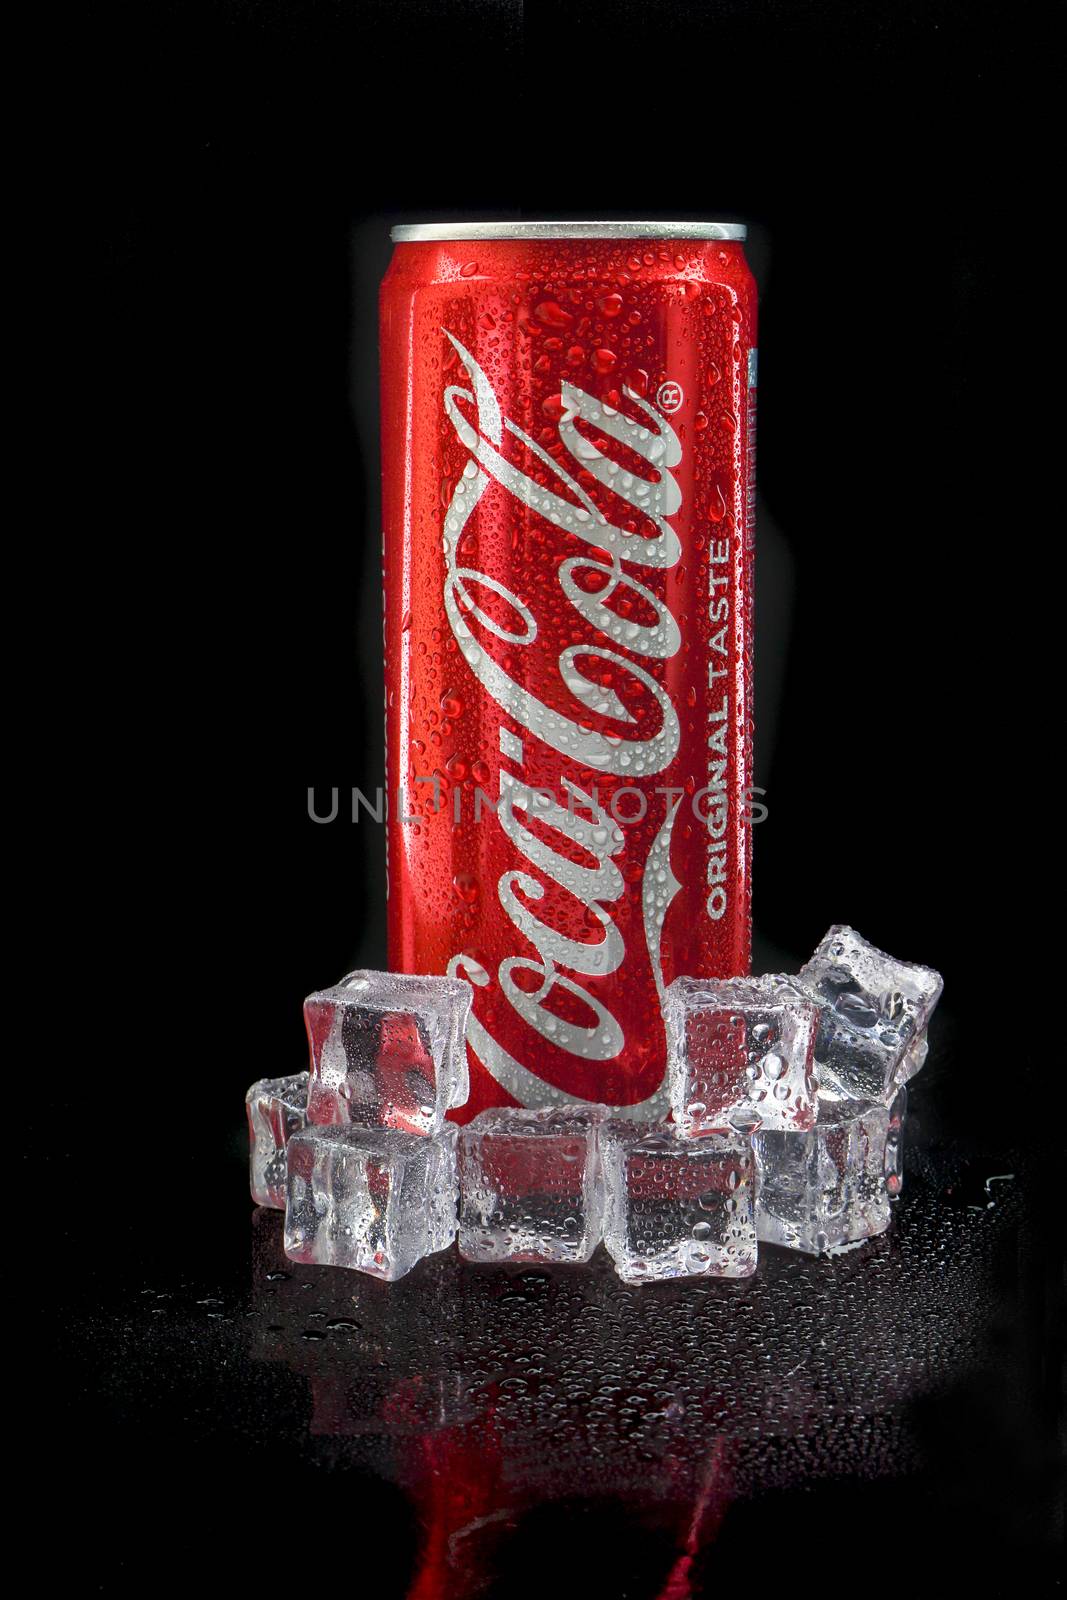 Kuala Lumpur, Malaysia - March 5, 2020 : Cola cola drink on black background. Coca Cola is competitor of Pepsi drink